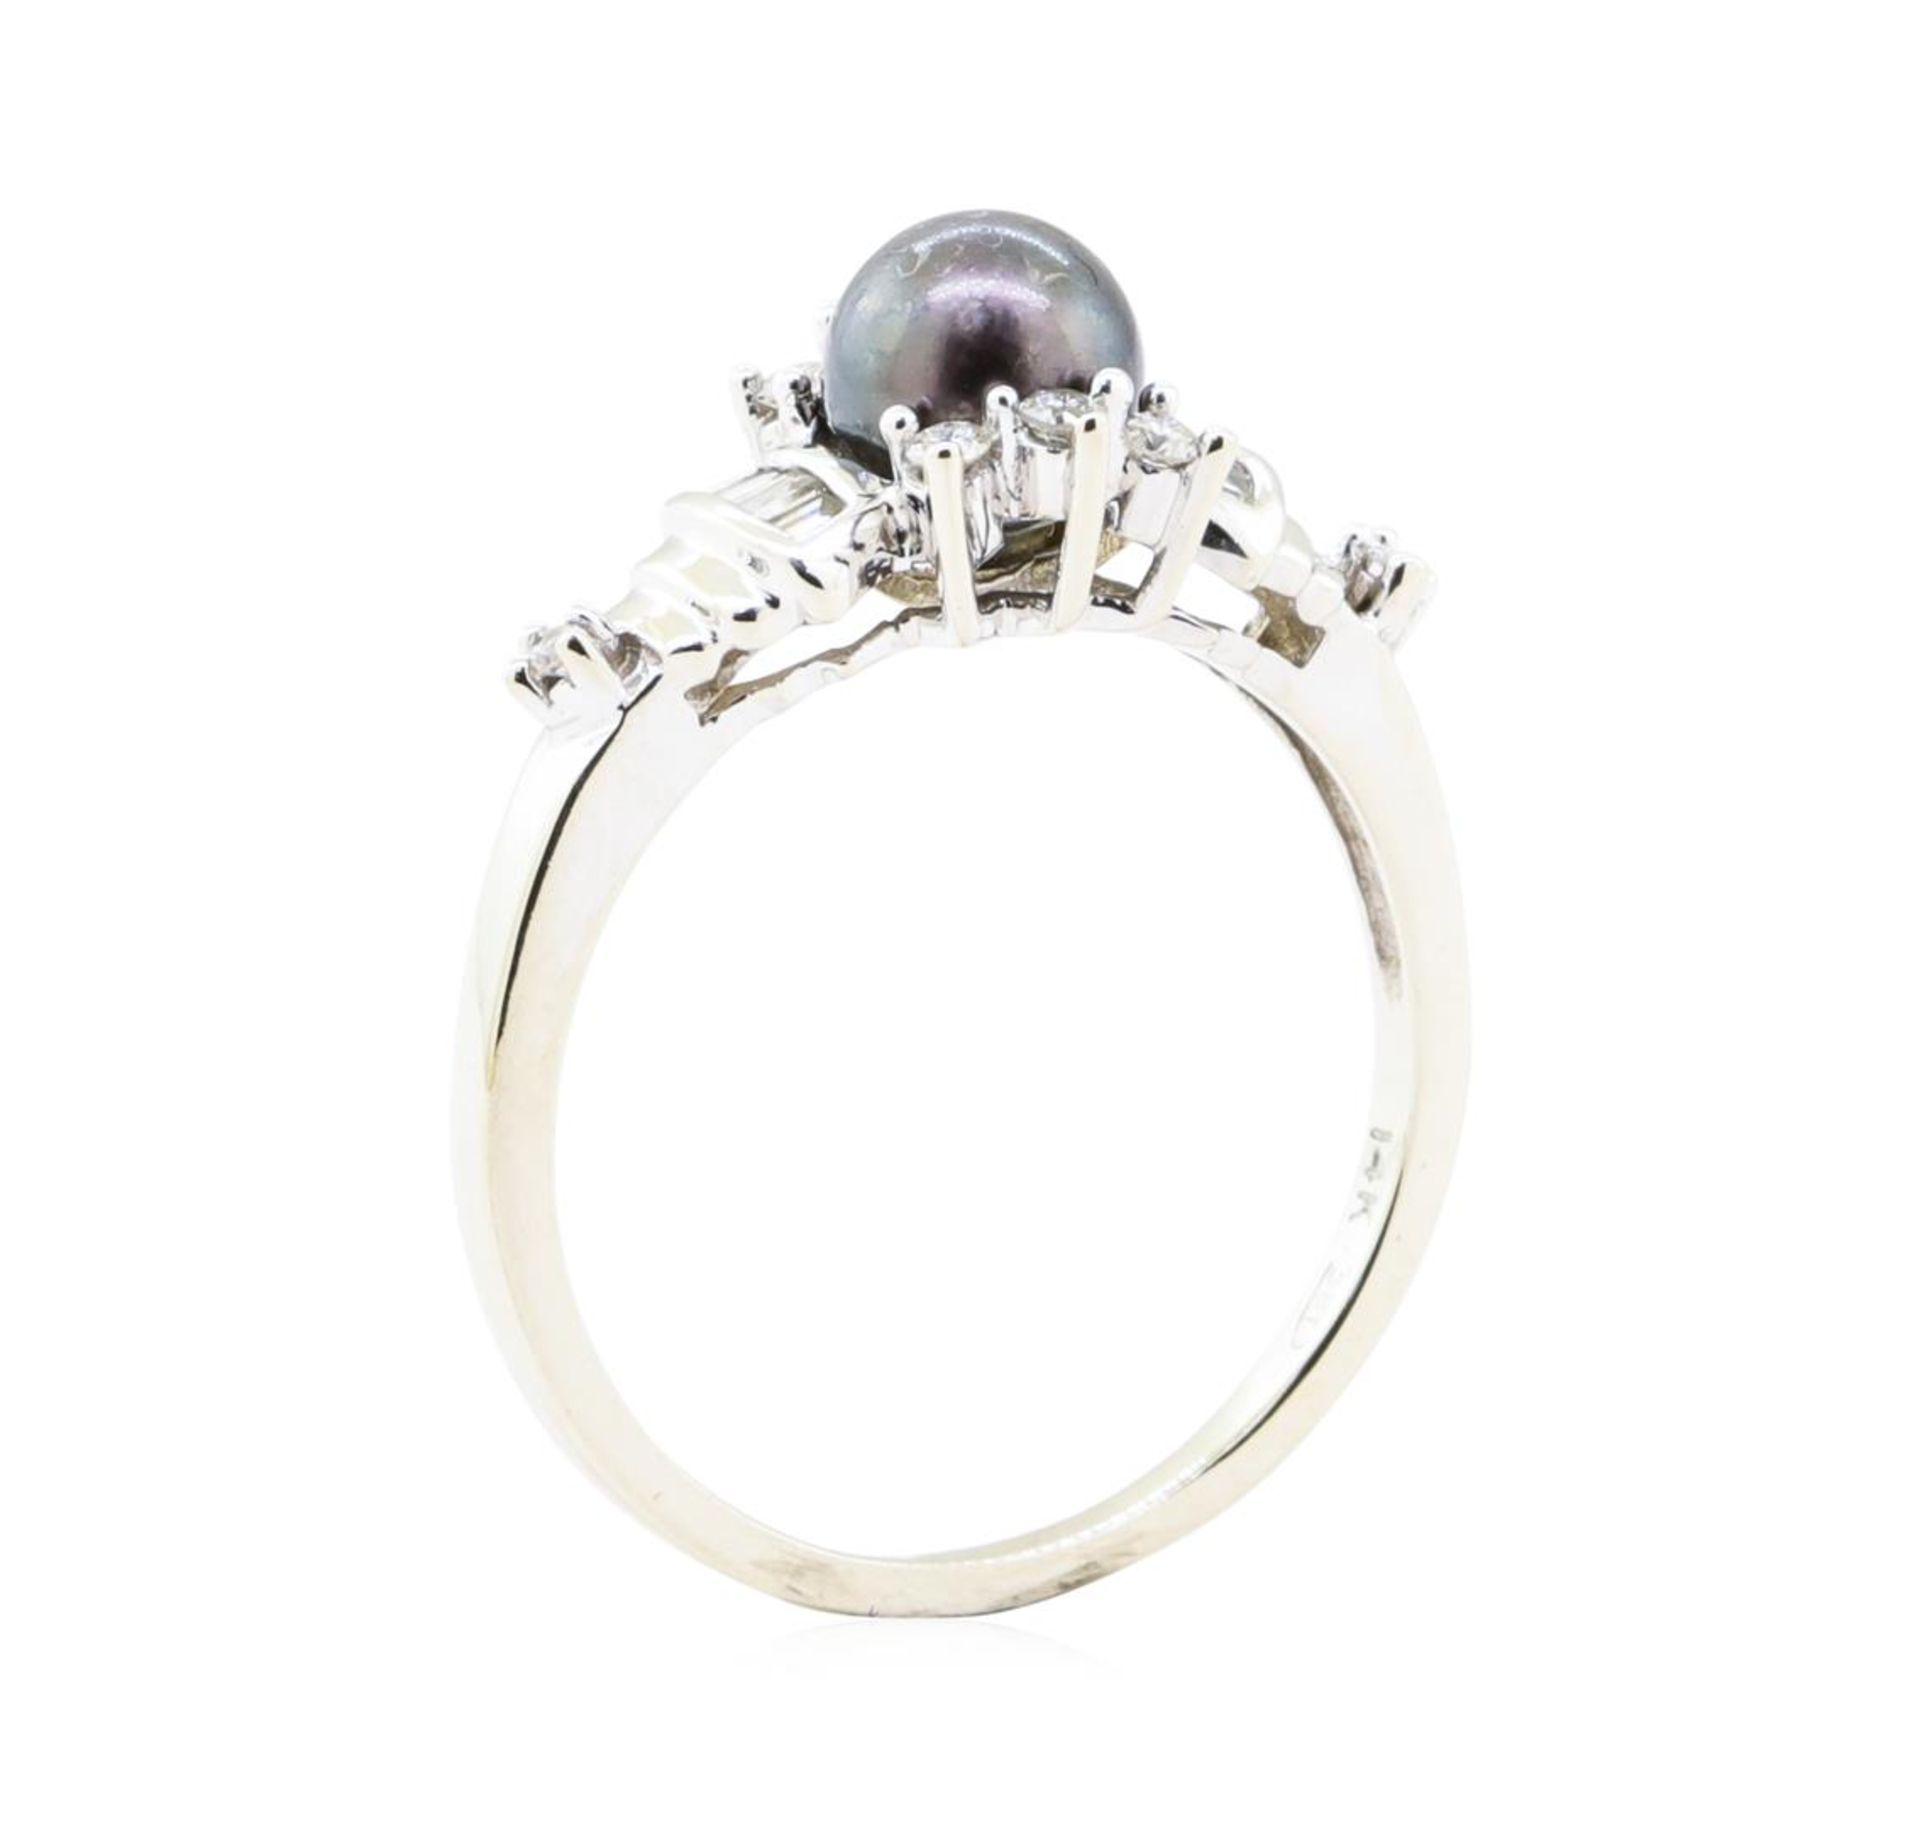 0.40 ctw Diamond and 7mm Dyed Black Pearl Ring - 14KT White Gold - Image 4 of 4